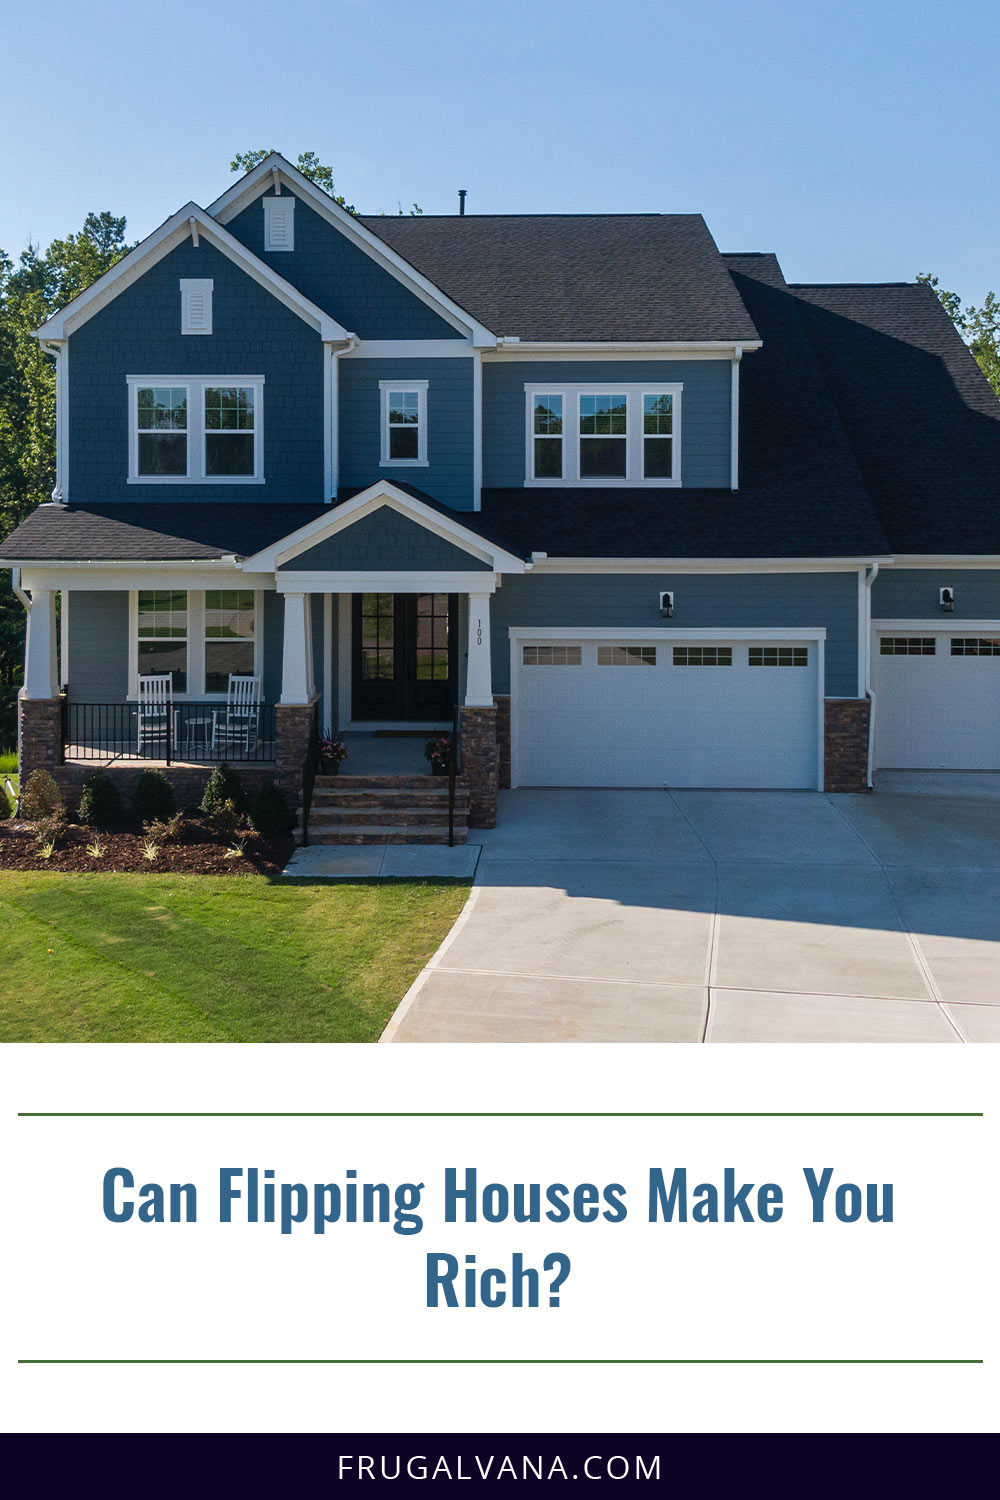 Can Flipping Houses Make You Rich?